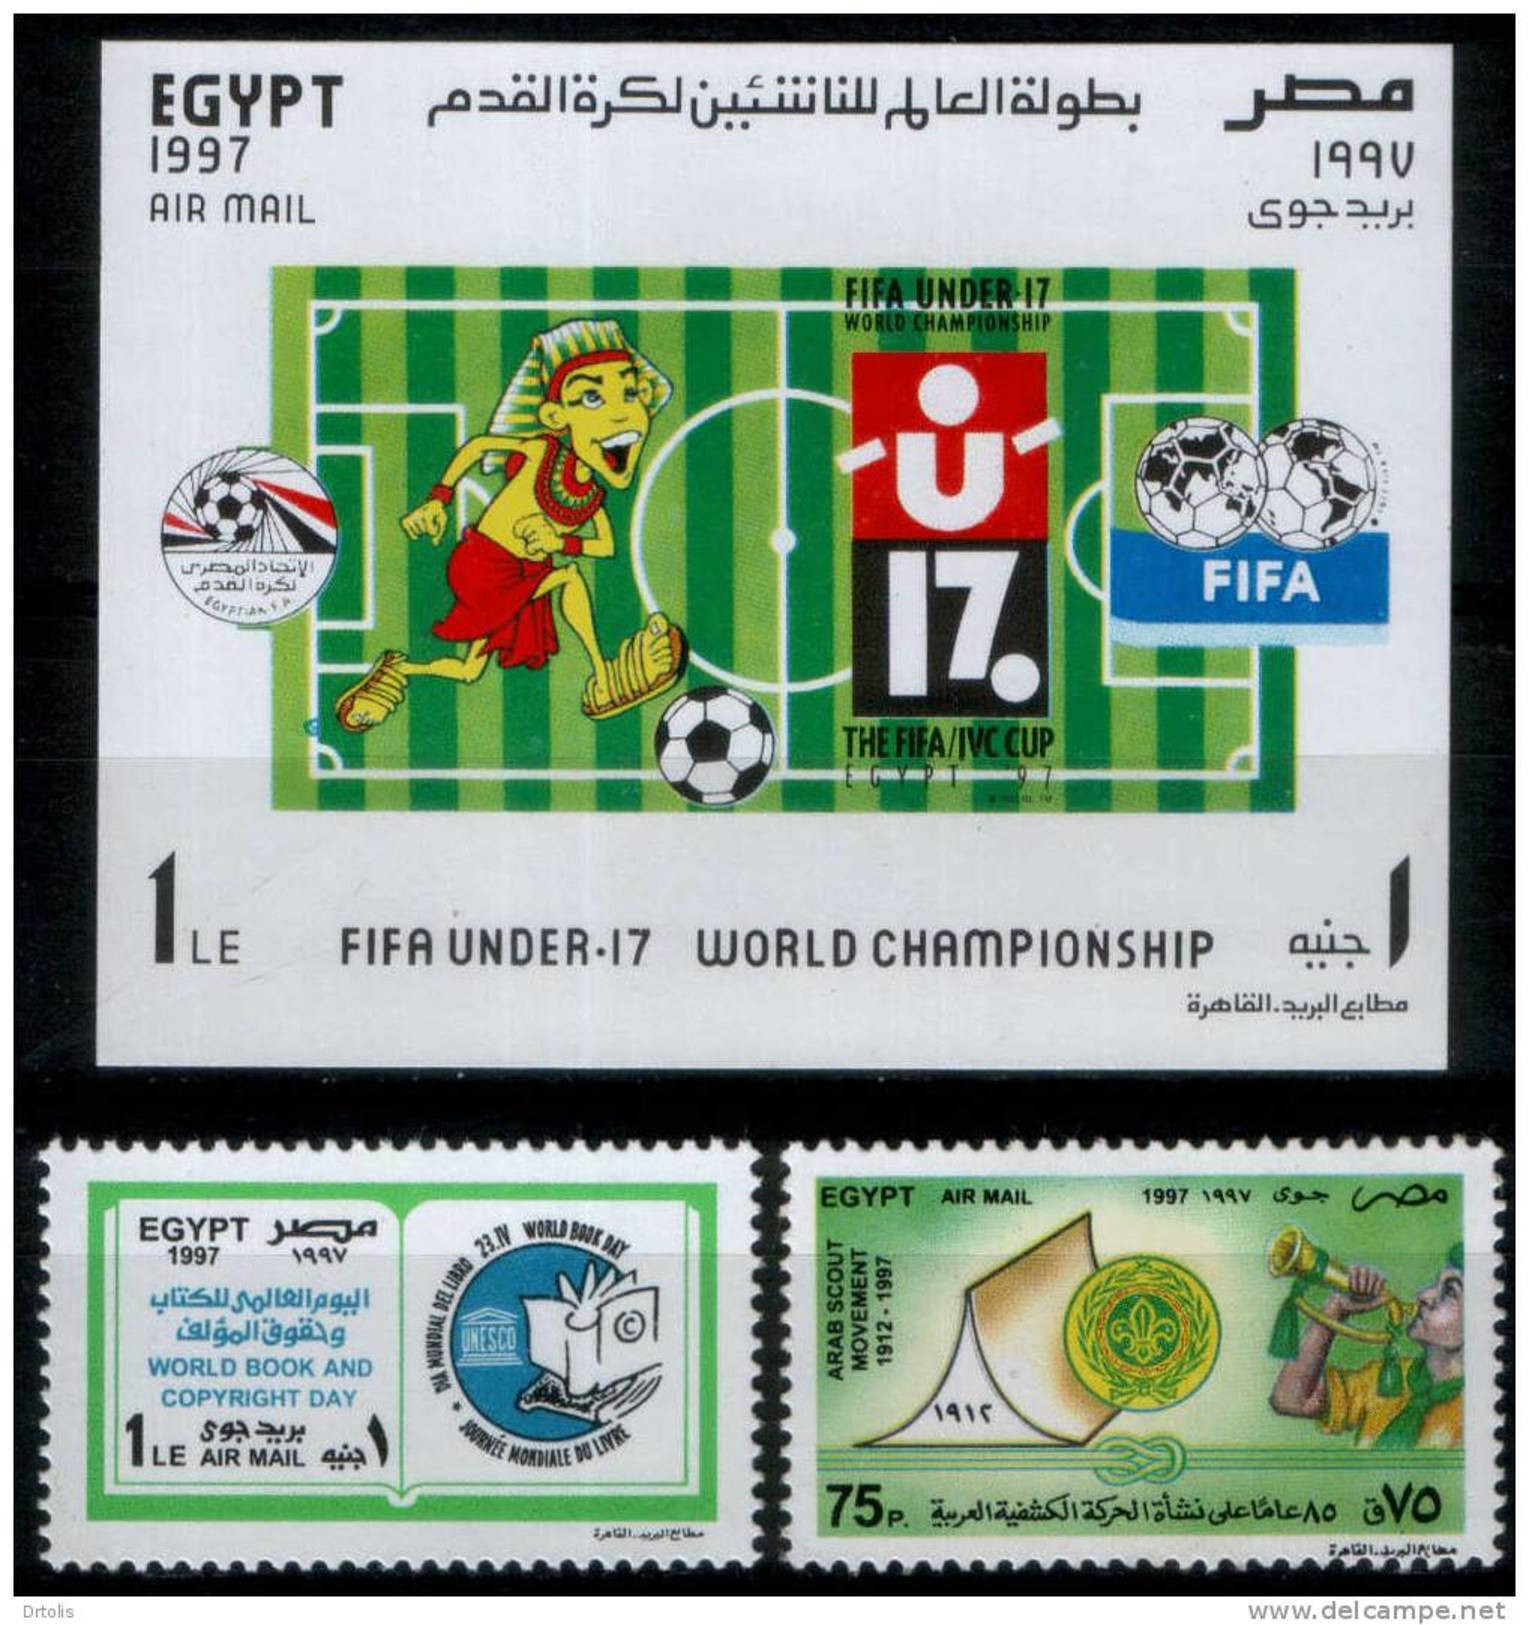 EGYPT / 1997 / COMPLETE YEAR ISSUES / MNH / VF / 9 SCANS .